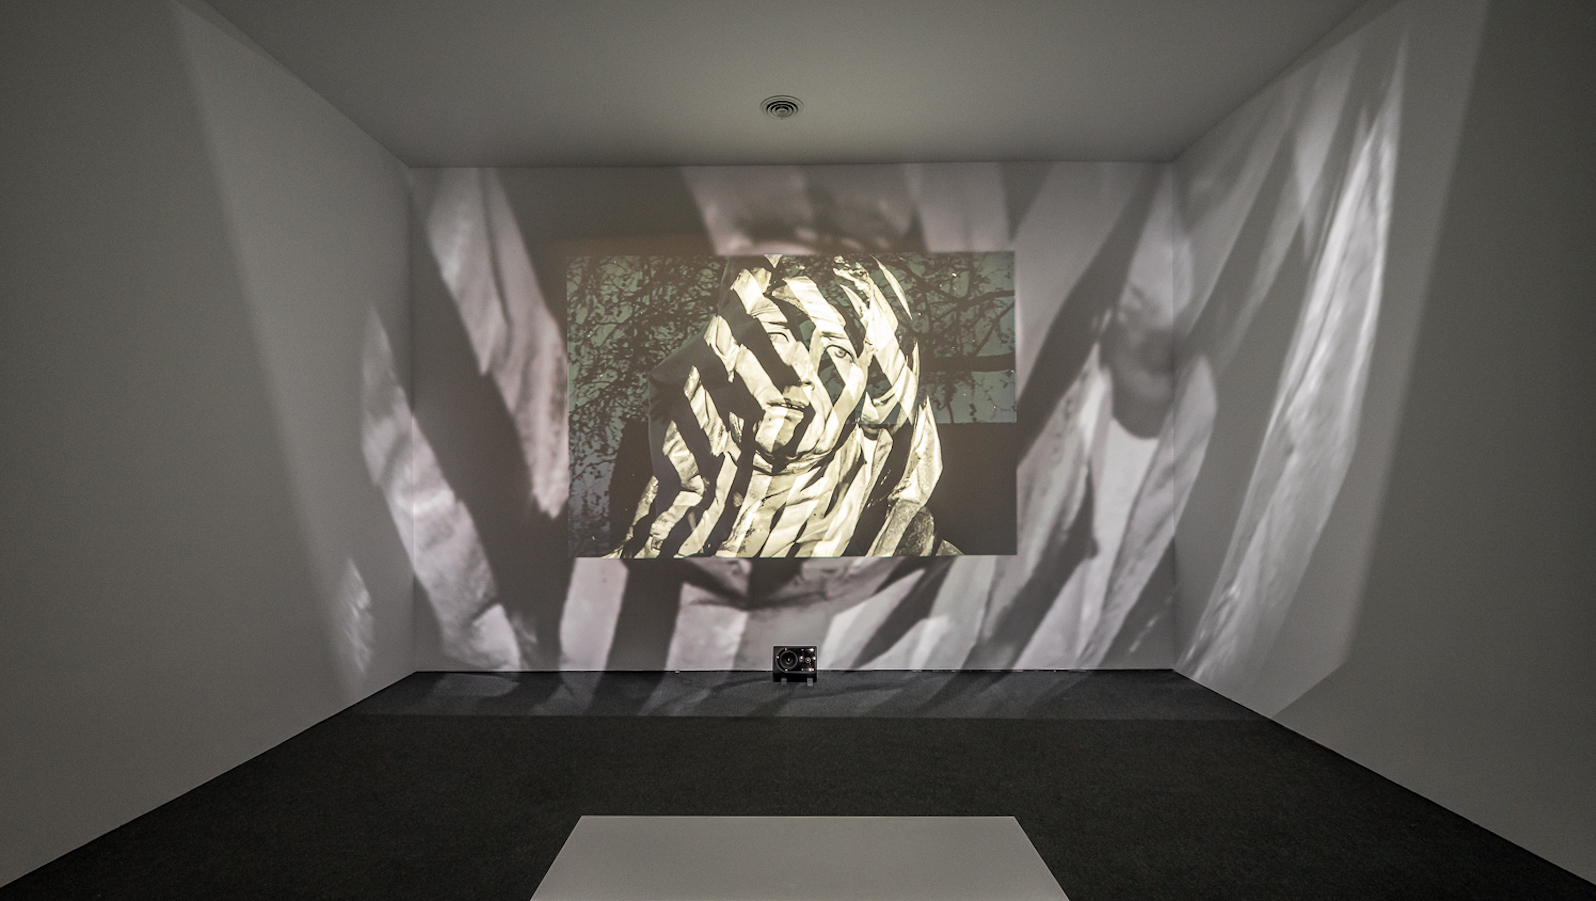 A gallery with a screen showing a statue's face, over which is projected black and white stripes that also emerge out of the screen onto the walls of the gallery